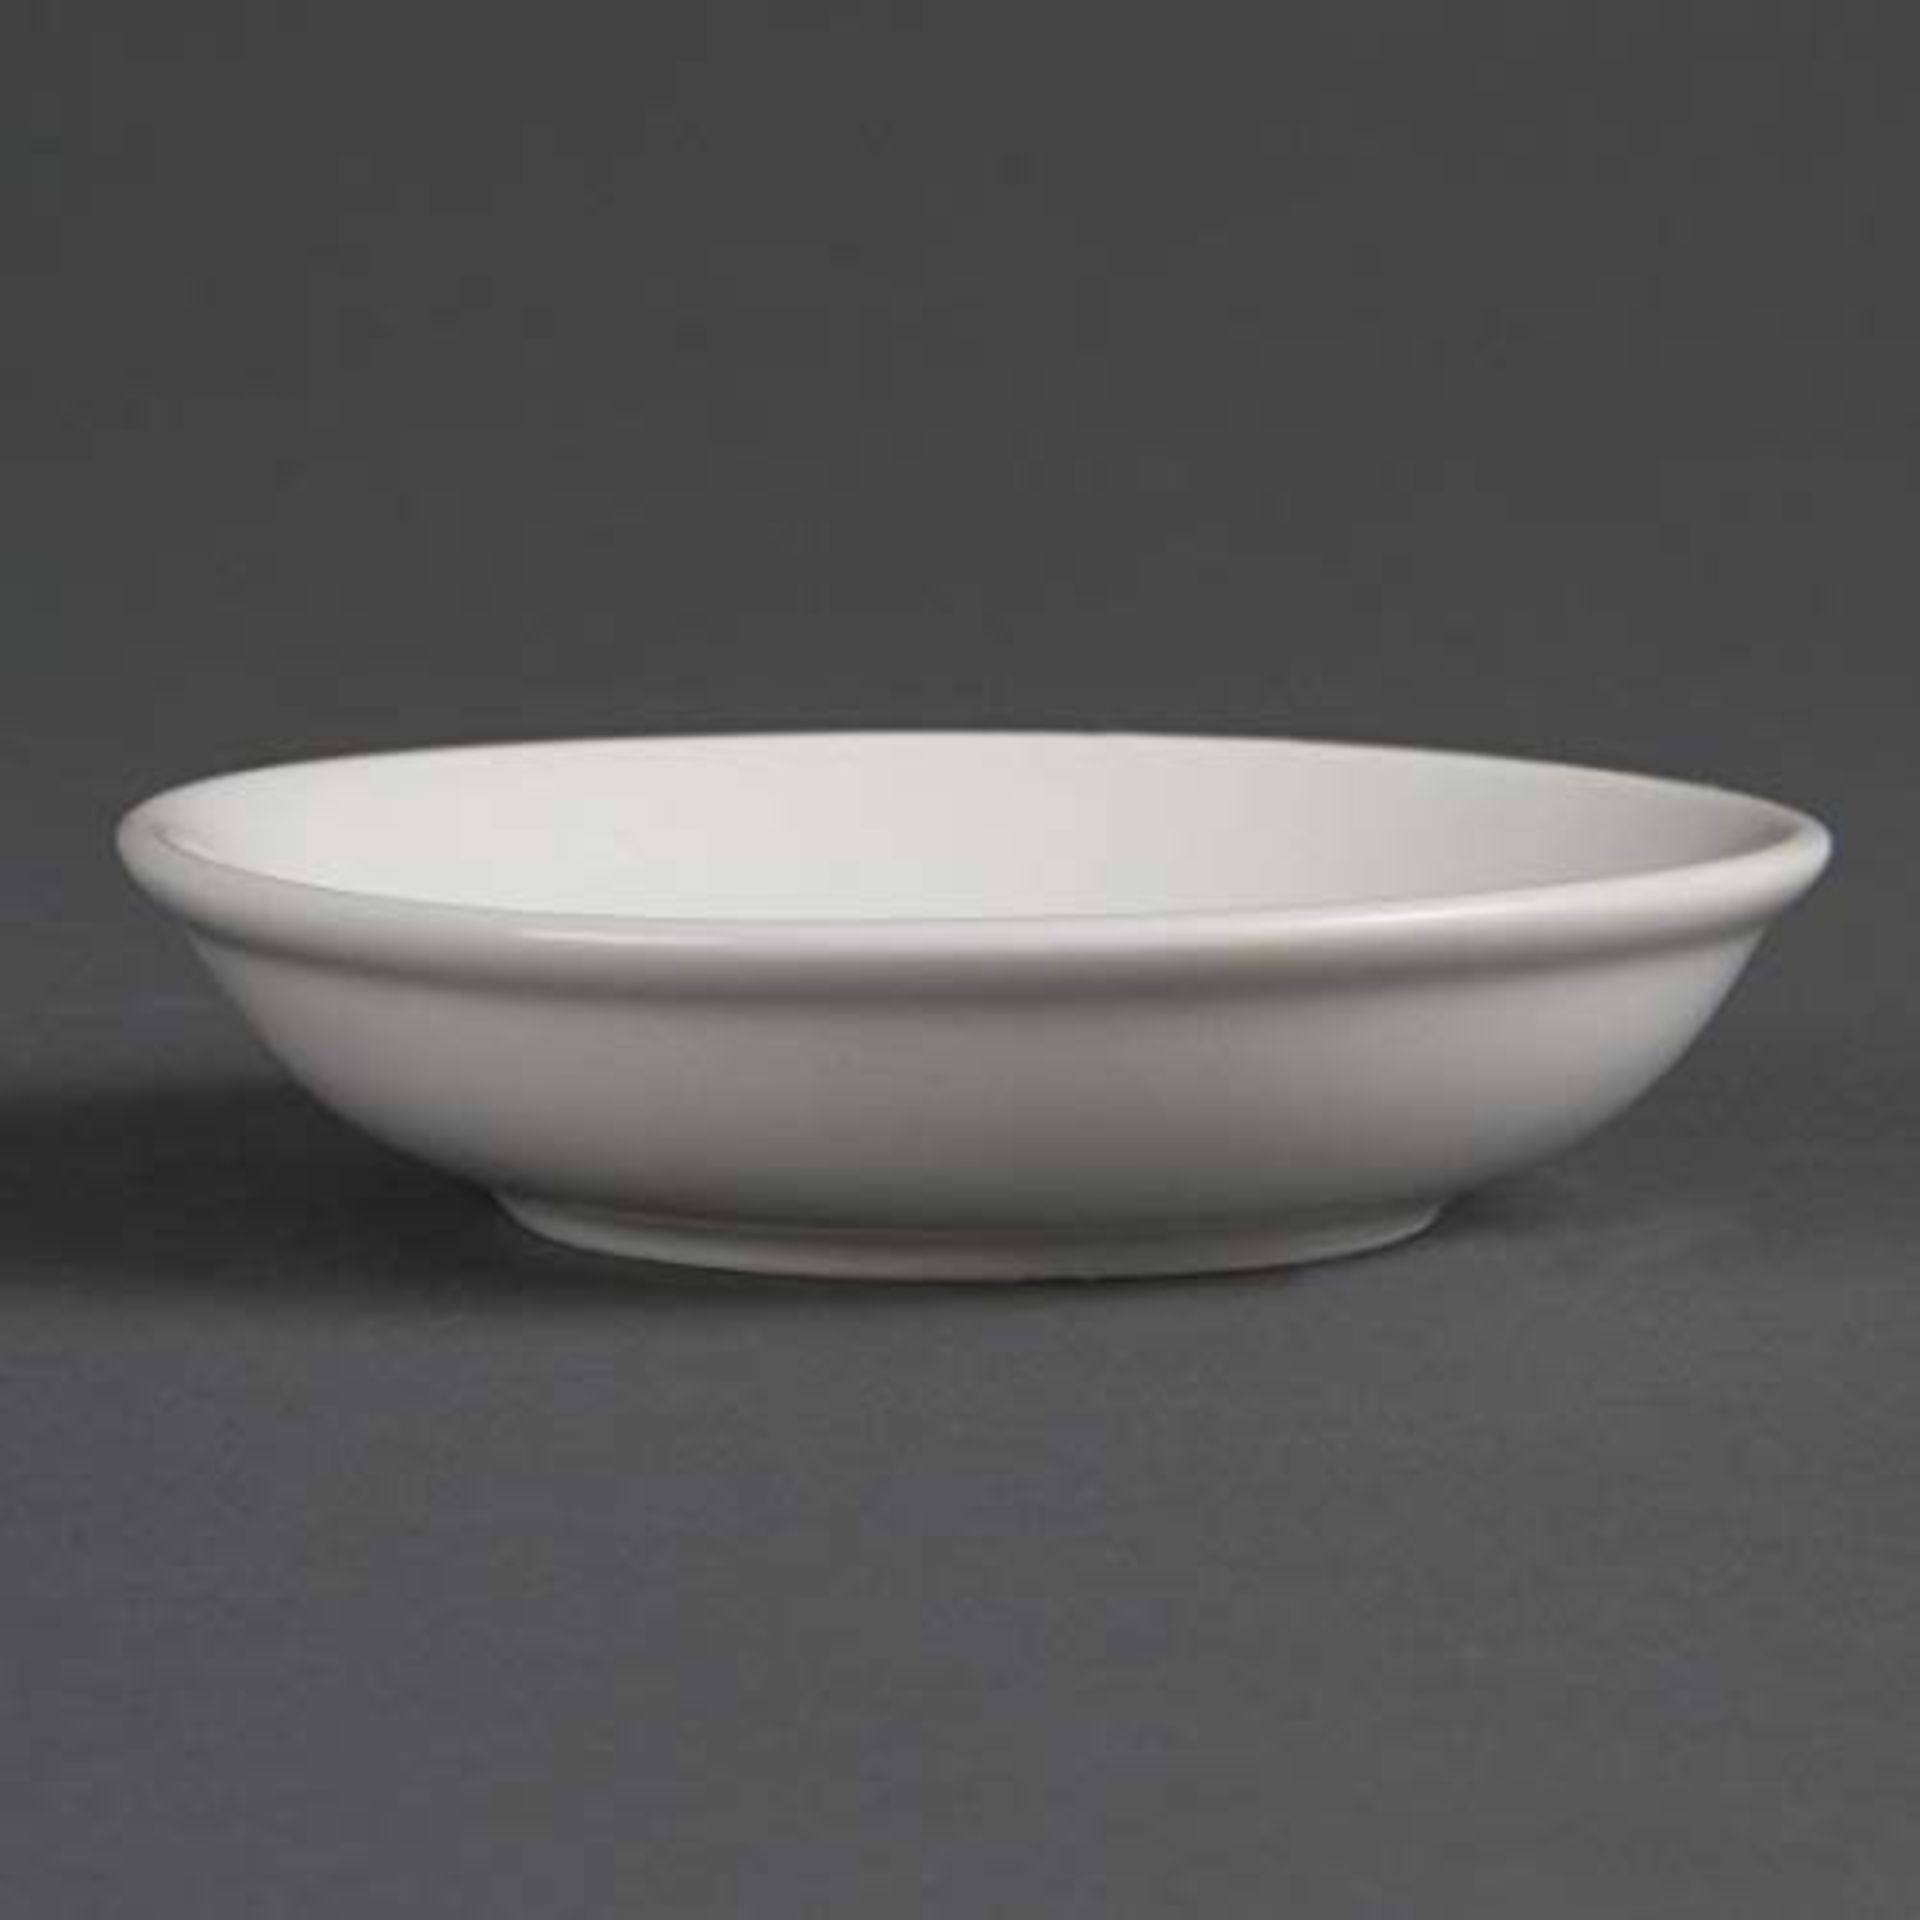 Olympia White Ware Soy Dishes 100mm Porcelain Sauce Dipping Bowls 12pc